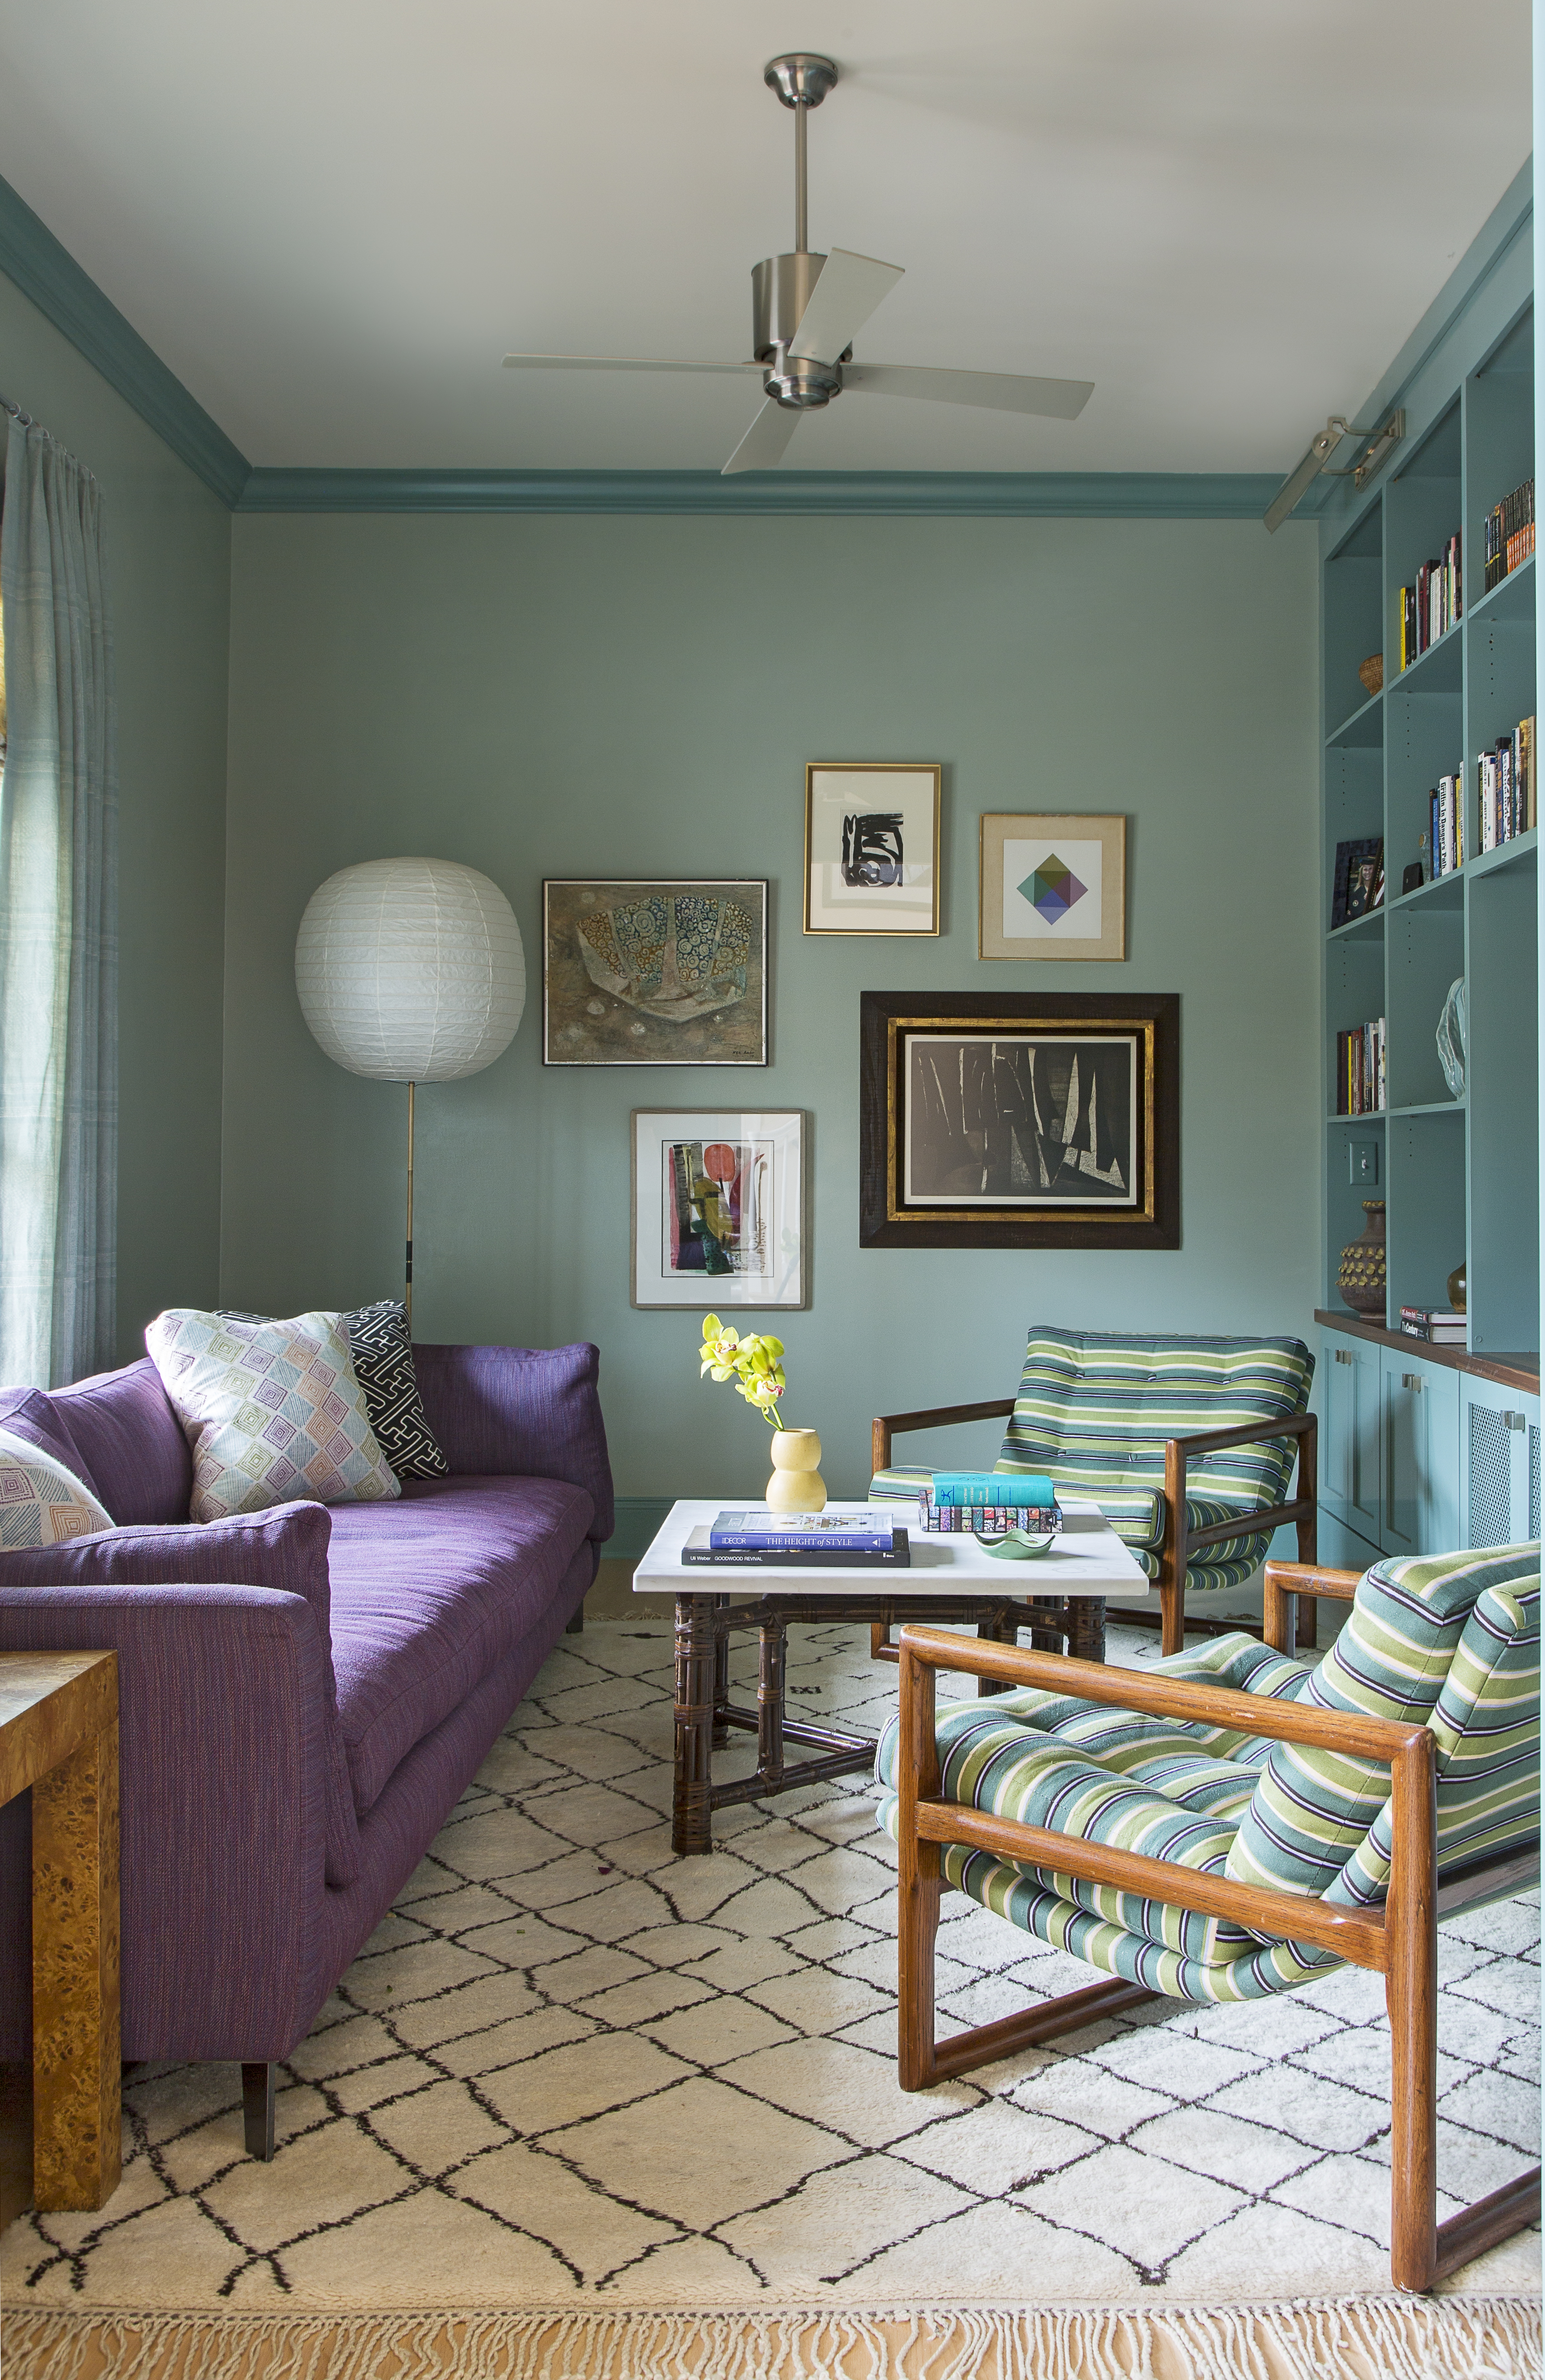 Local artisan Suzanne Allen covered the den walls in a hand-troweled turquoise plaster for a luminous finish. The vintage Moroccan Beni Ourain rug from Imports from Marrakesh and mod cube-scoop chairs from 1stDibs add fun pattern, shape, and texture.